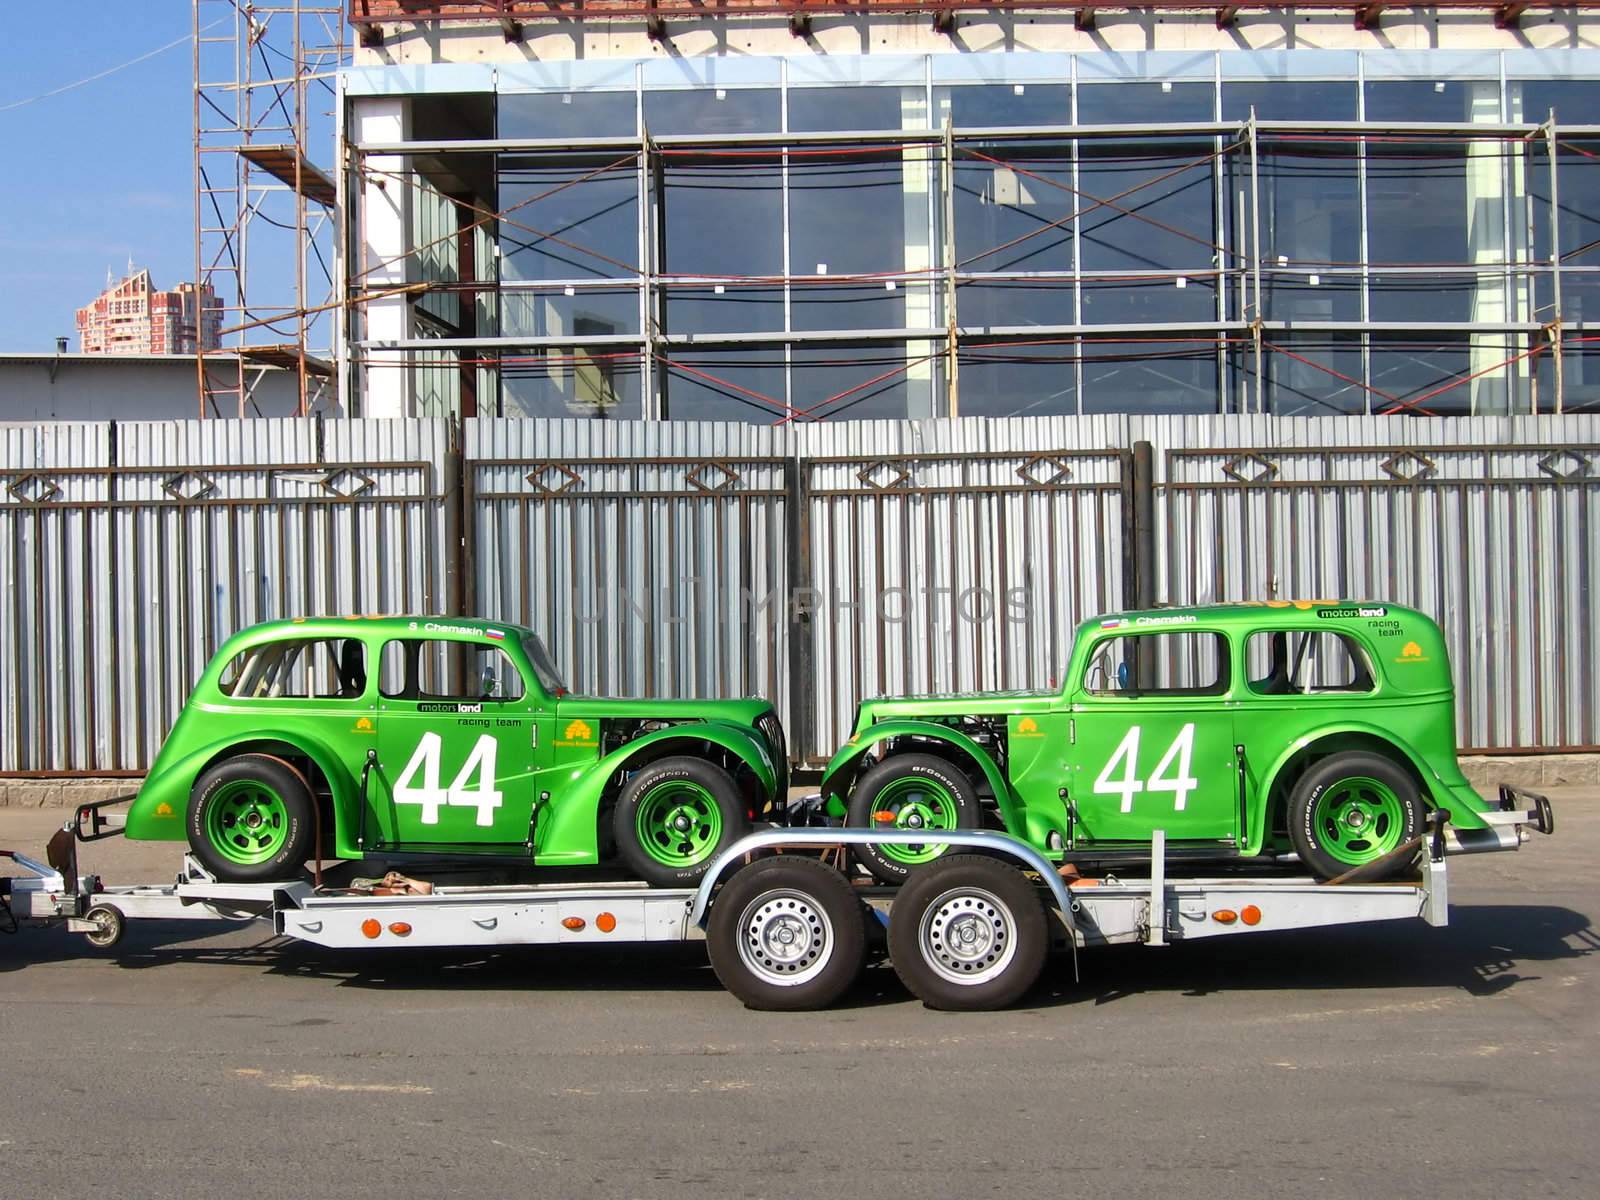 Two green racing cars at the trailer